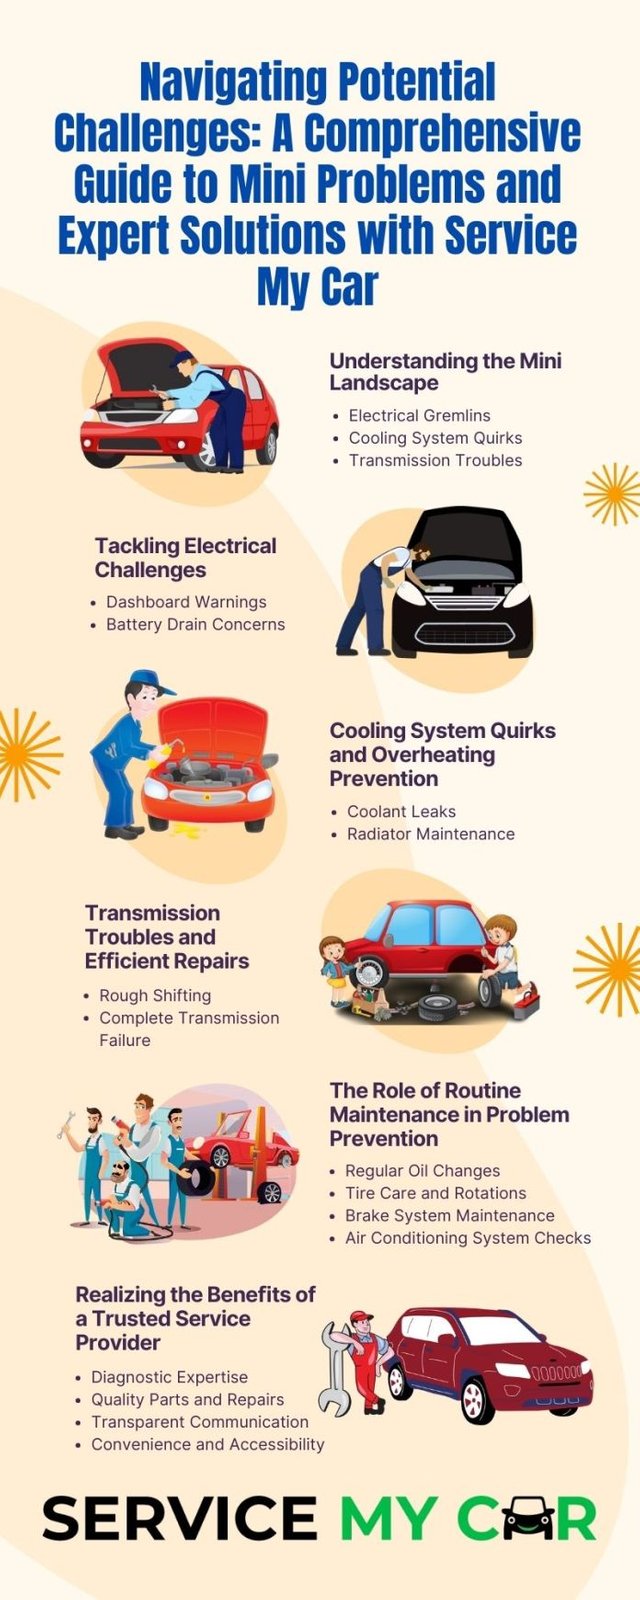 Navigating Potential Challenges: A Comprehensive Guide to Mini Problems and Expert Solutions with Service My Car